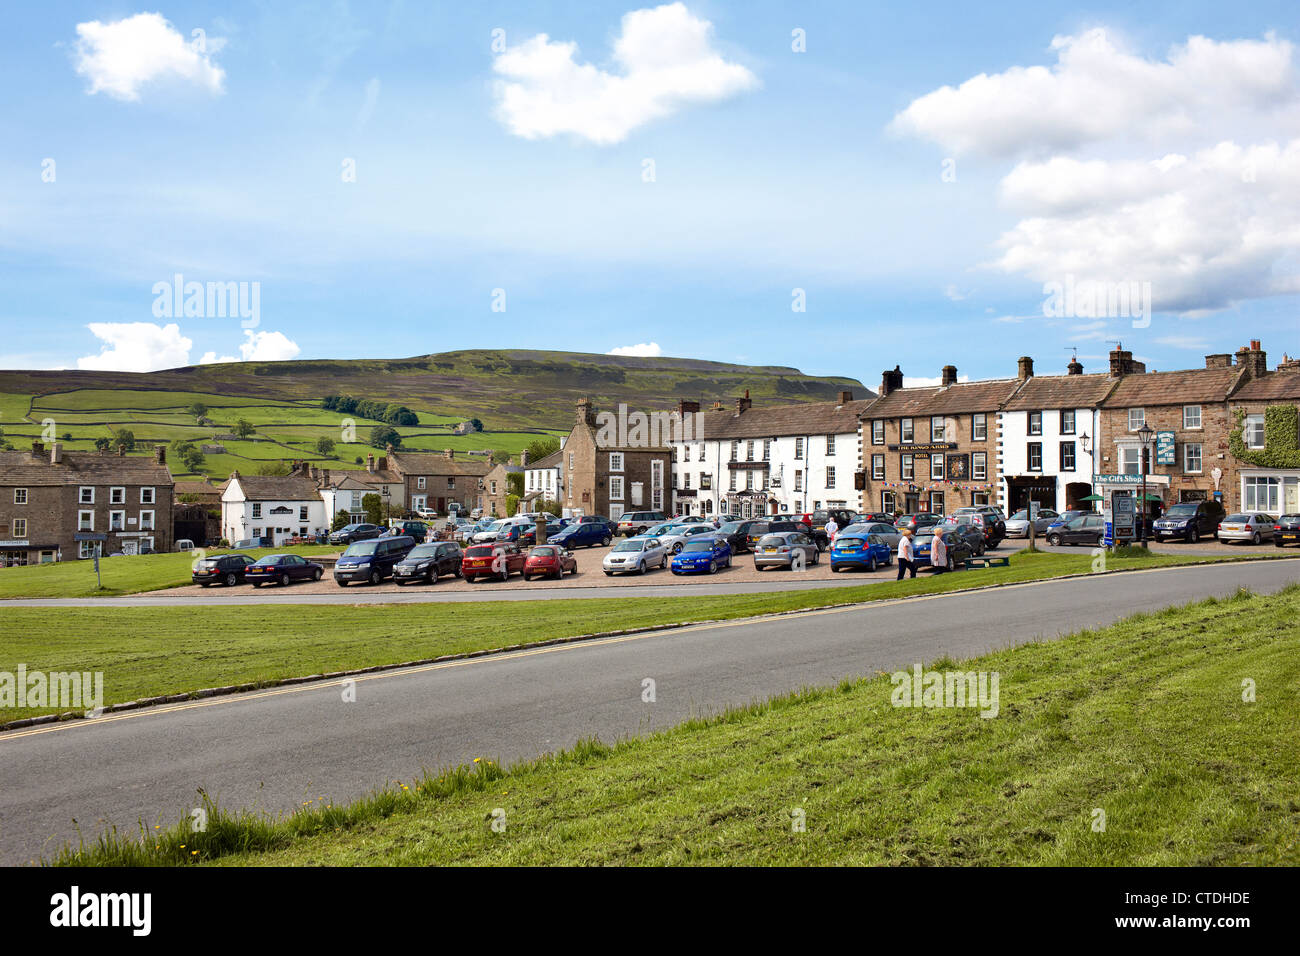 The village of Reeth located  in Swaledale, Yorkshire Dales UK Stock Photo